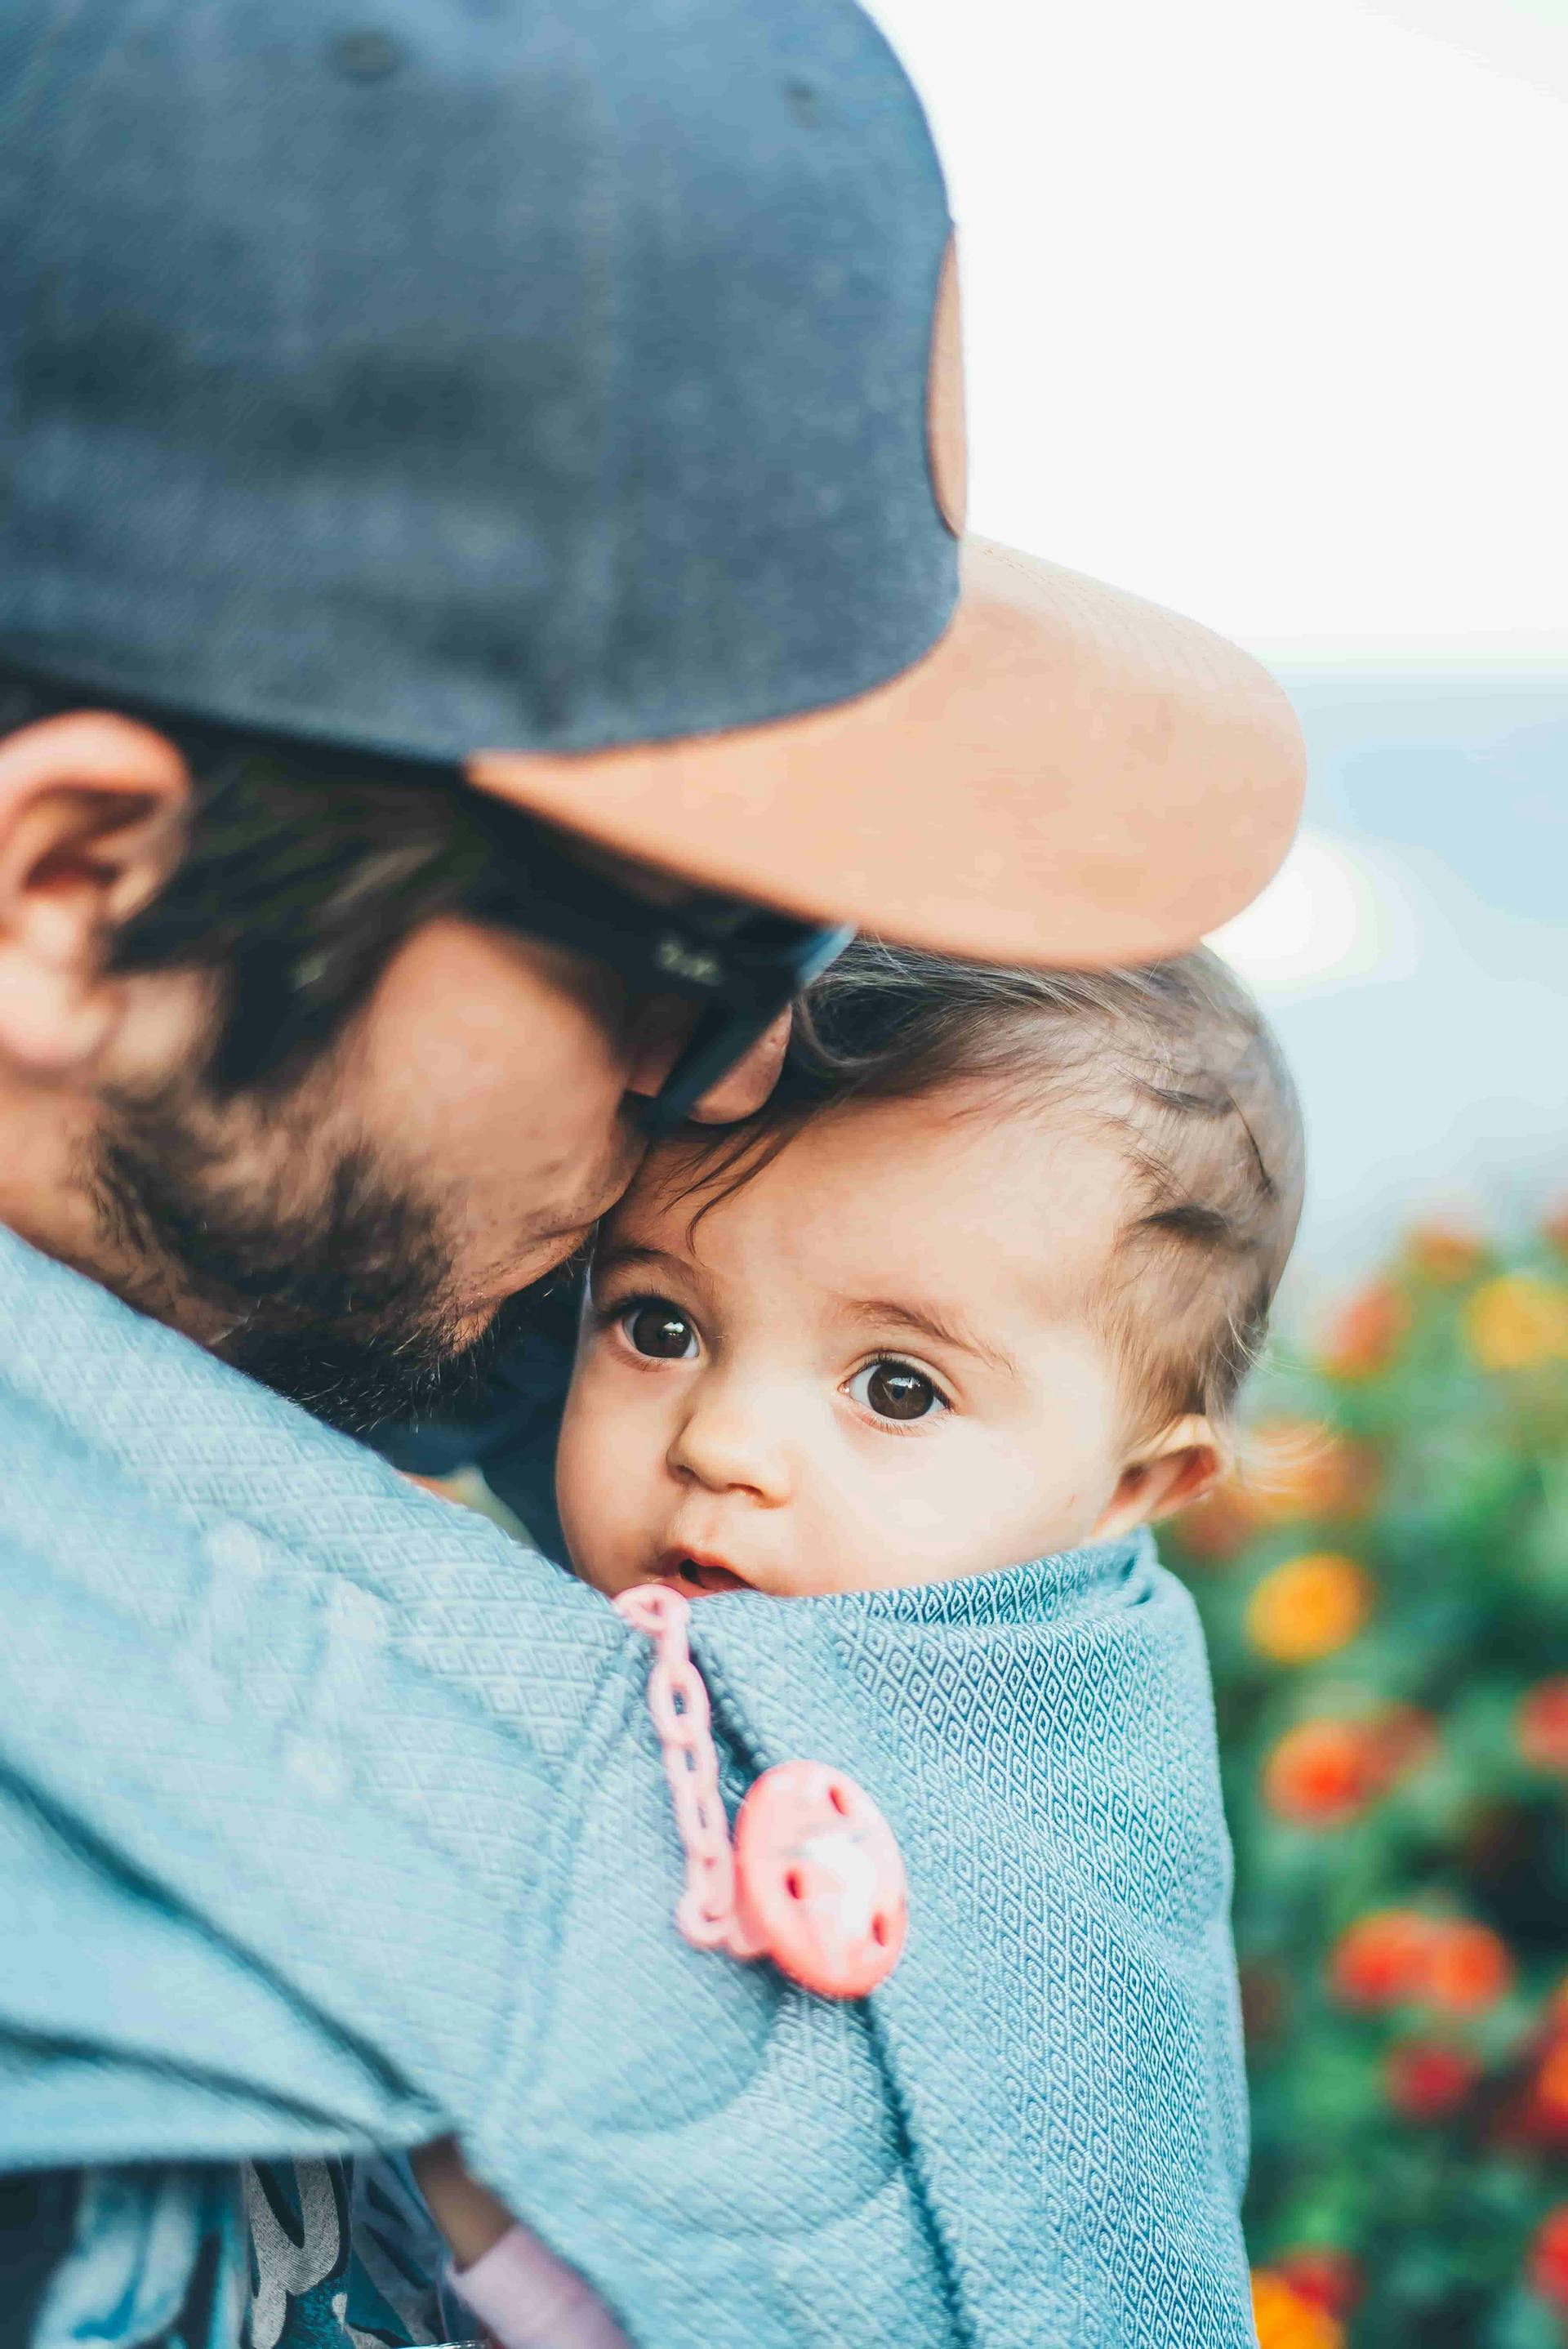 NHS England to Introduce Mental Health Checks and Support for New Fathers